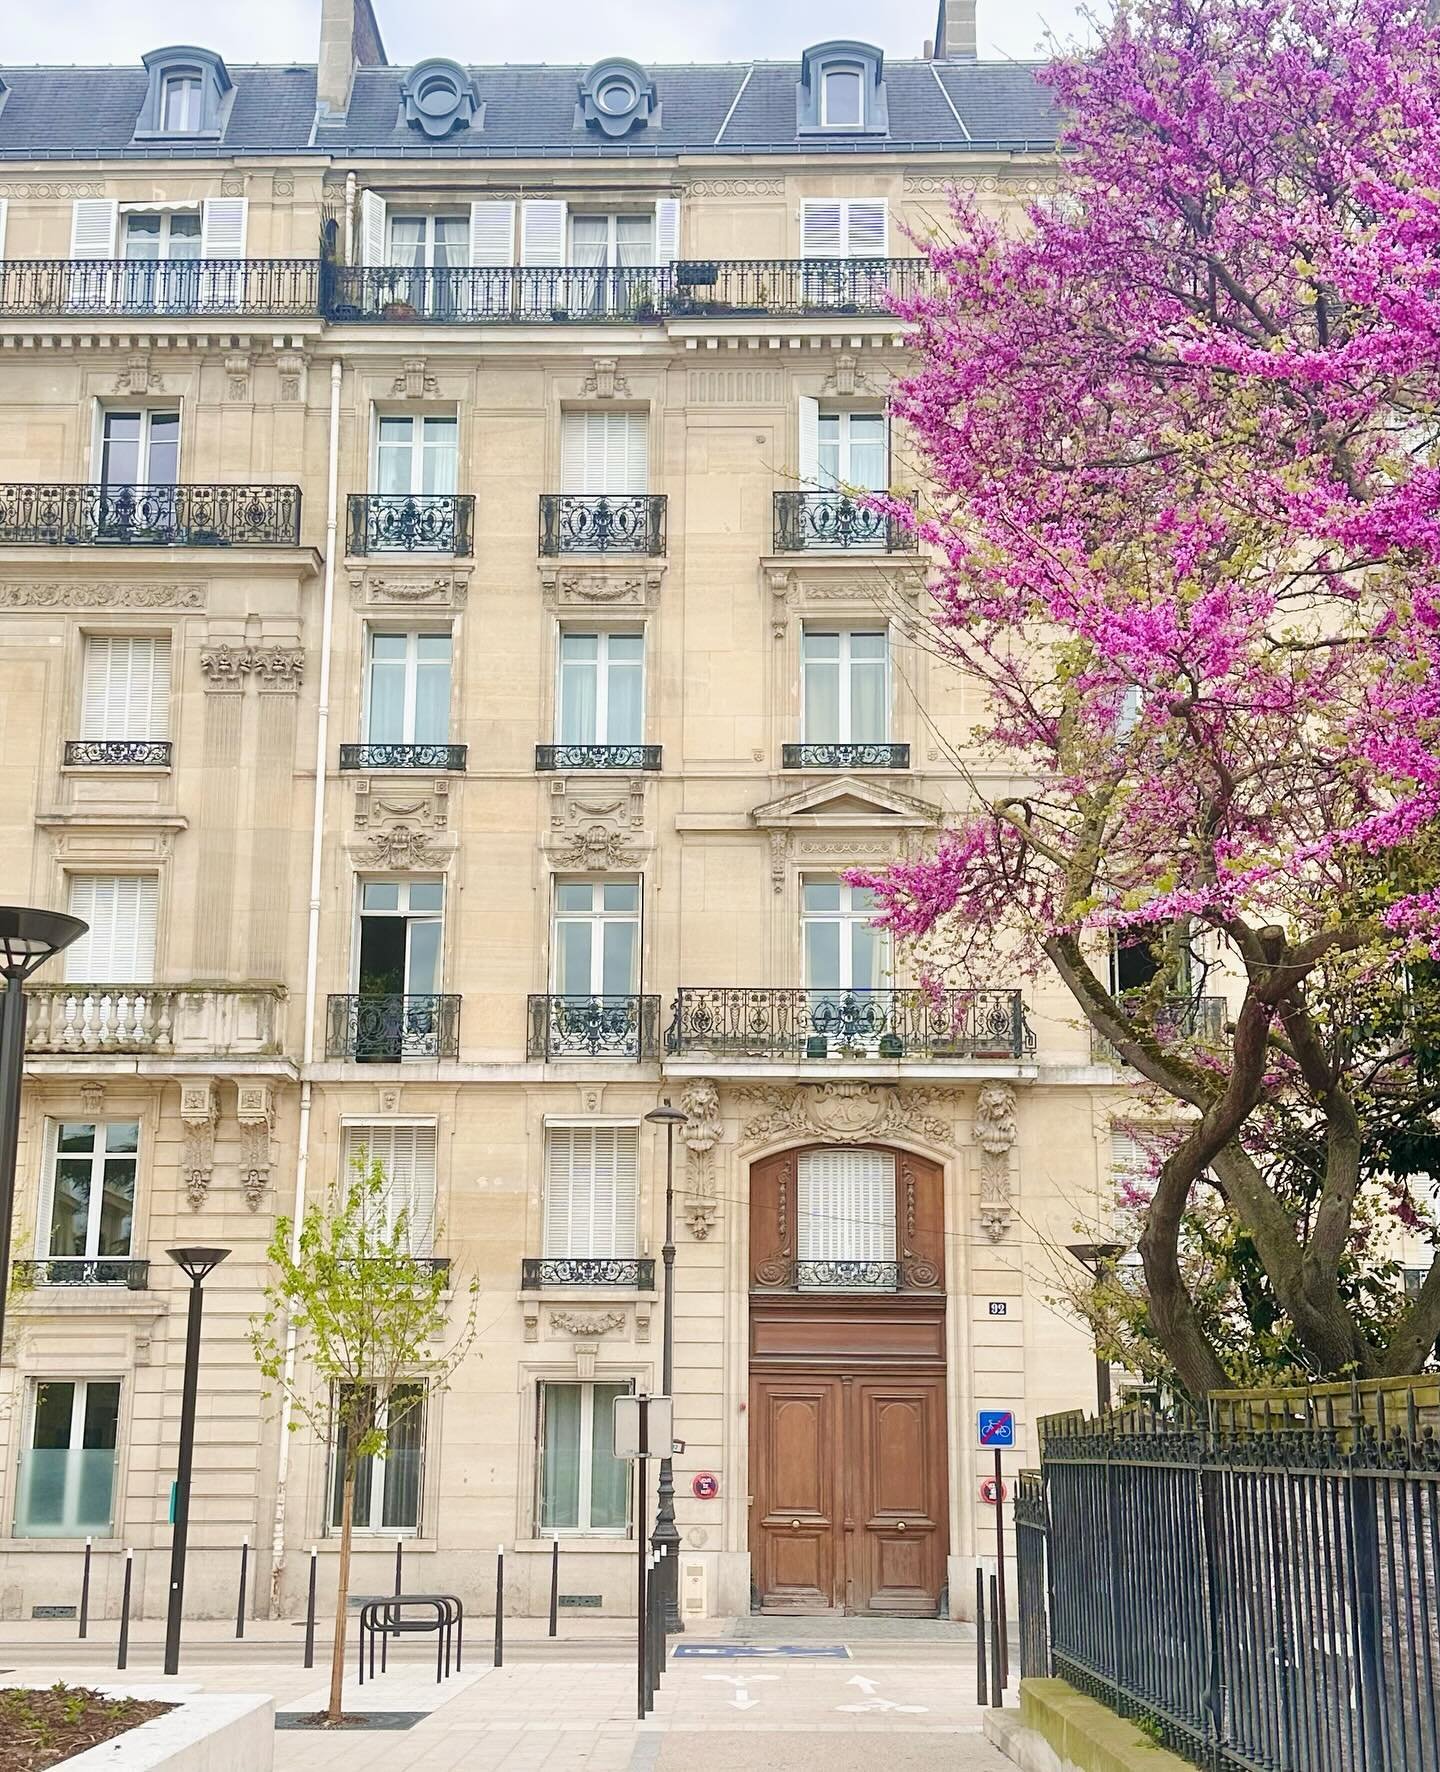 Collection of moments 💖 2nd week of April In Paris. #travelblogger #parisfrance #springinparis